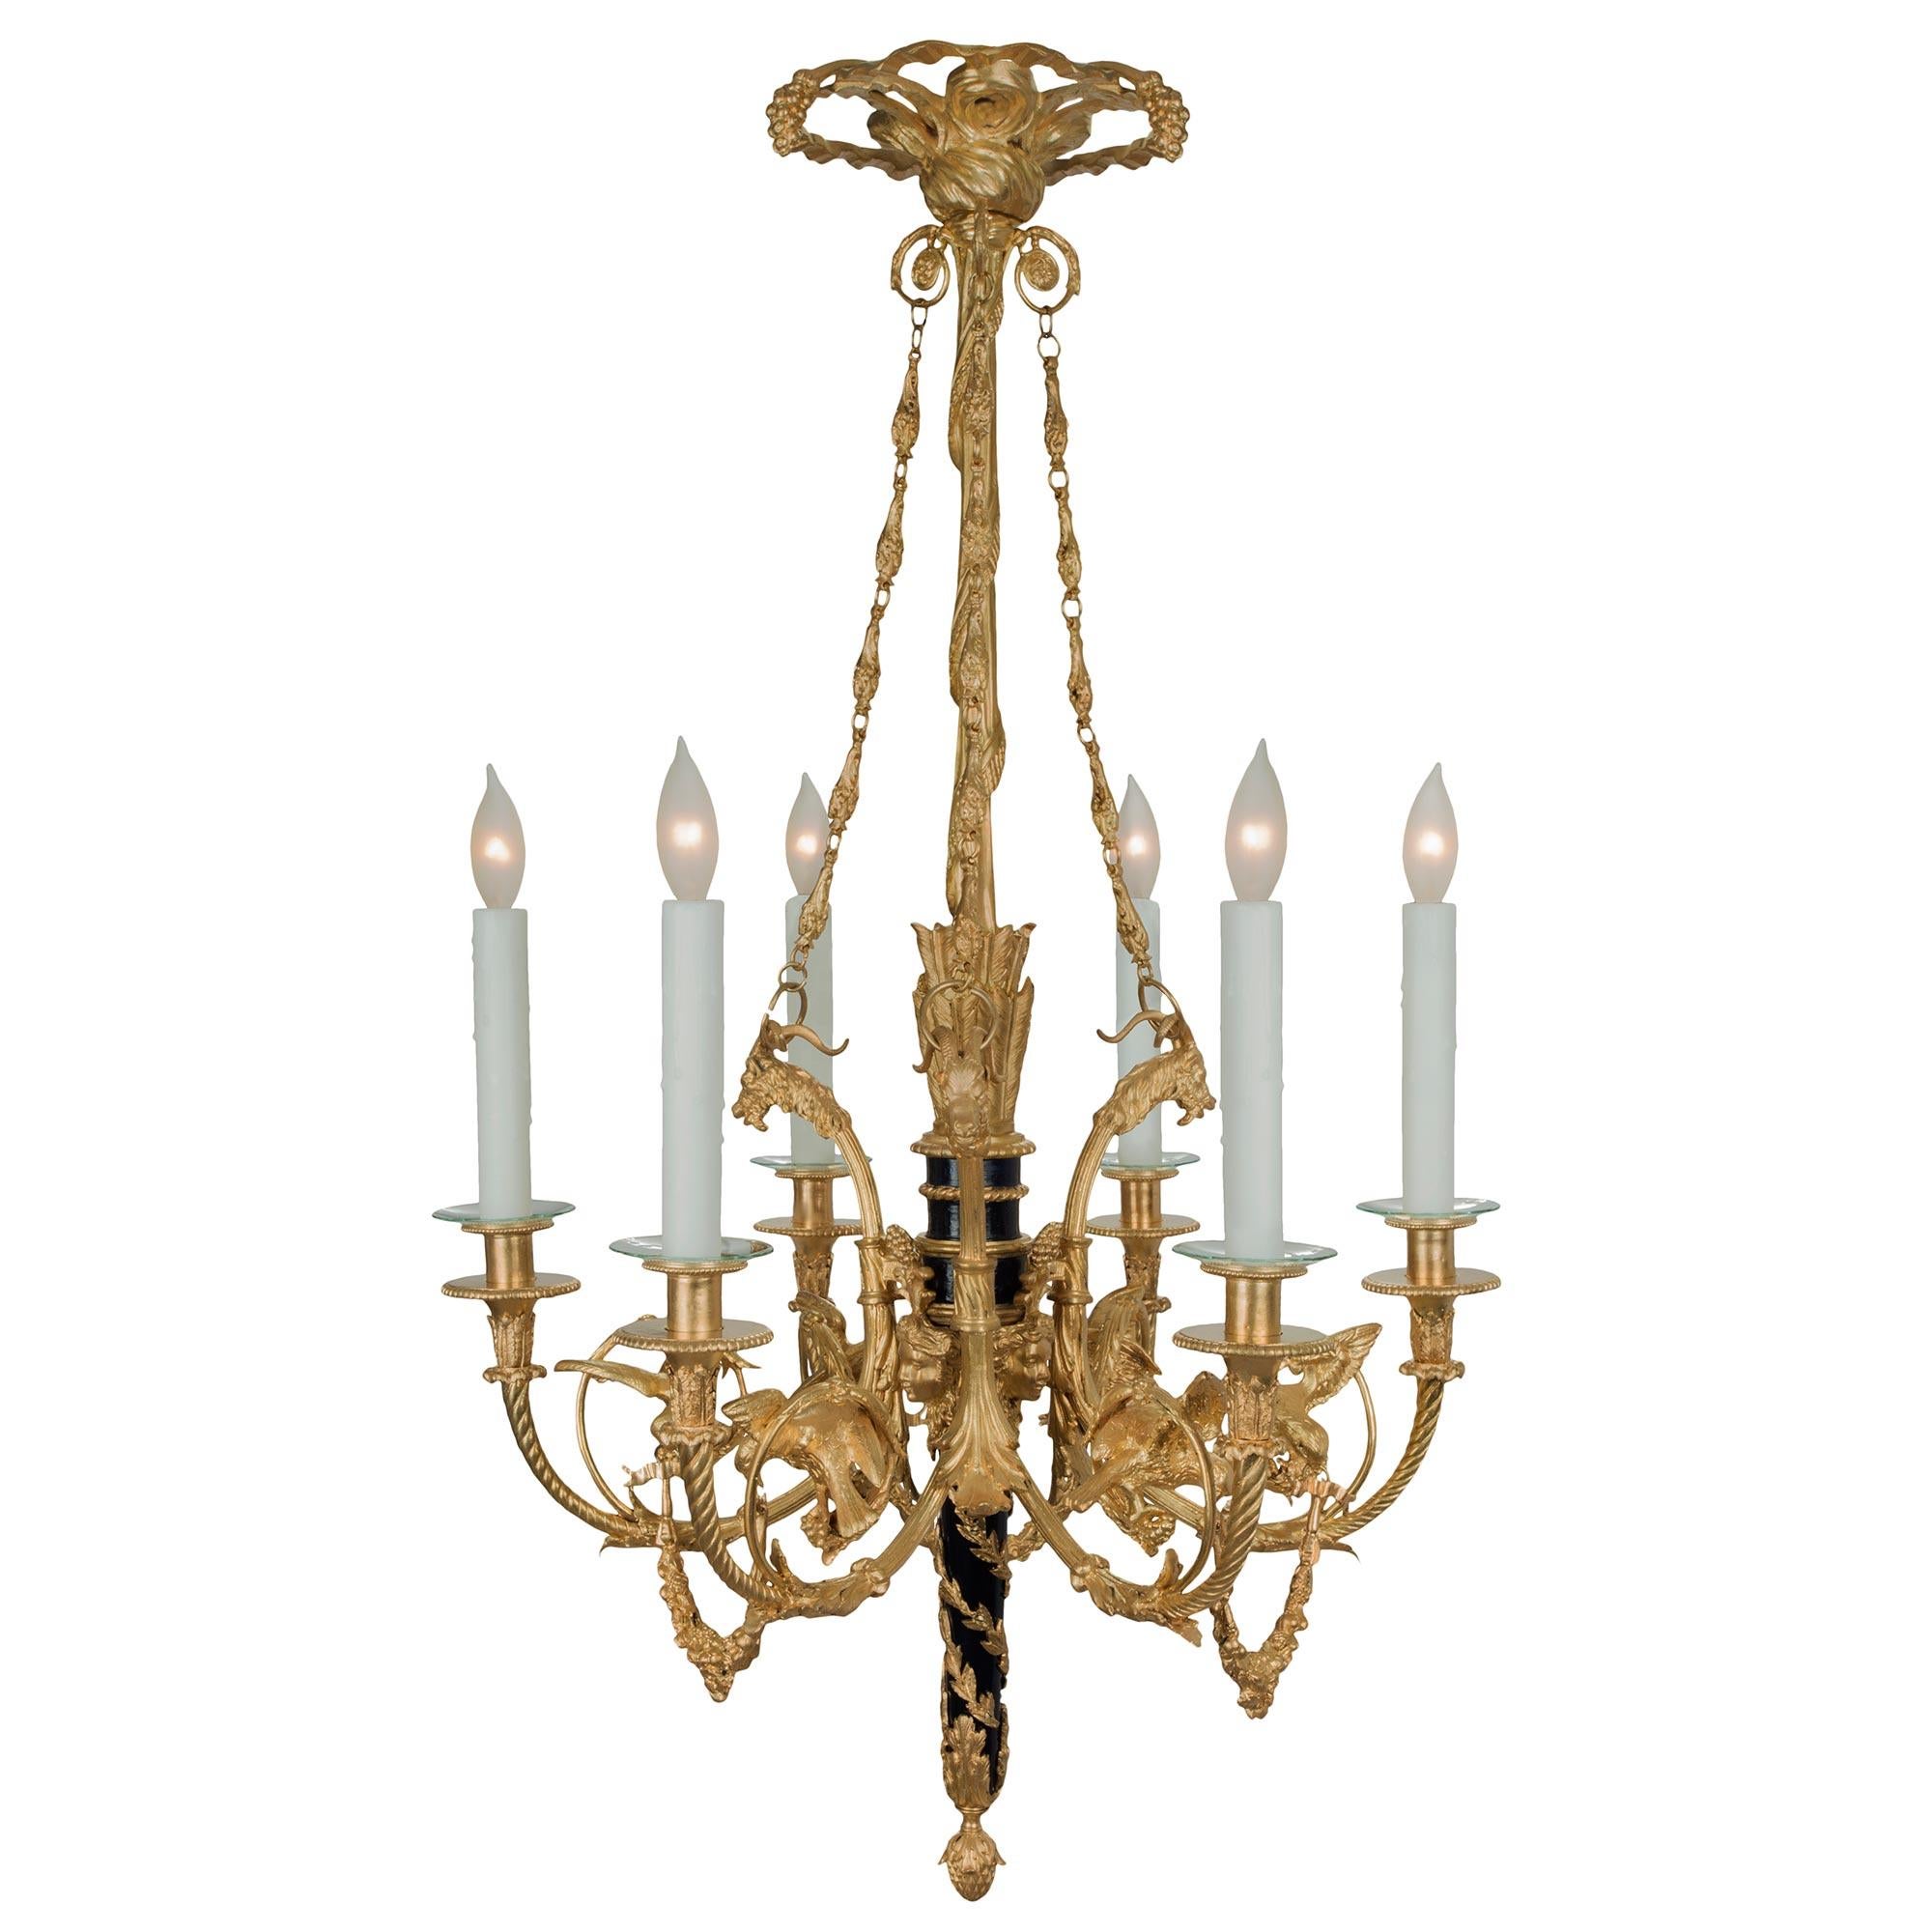 A sensational and high quality French 19th century Louis XVI st. ormolu and cobalt blue enamel six light chandelier. The chandelier is centered by an inverted acorn final leading up richly chased foliate movements encasing the enameled cobalt blue